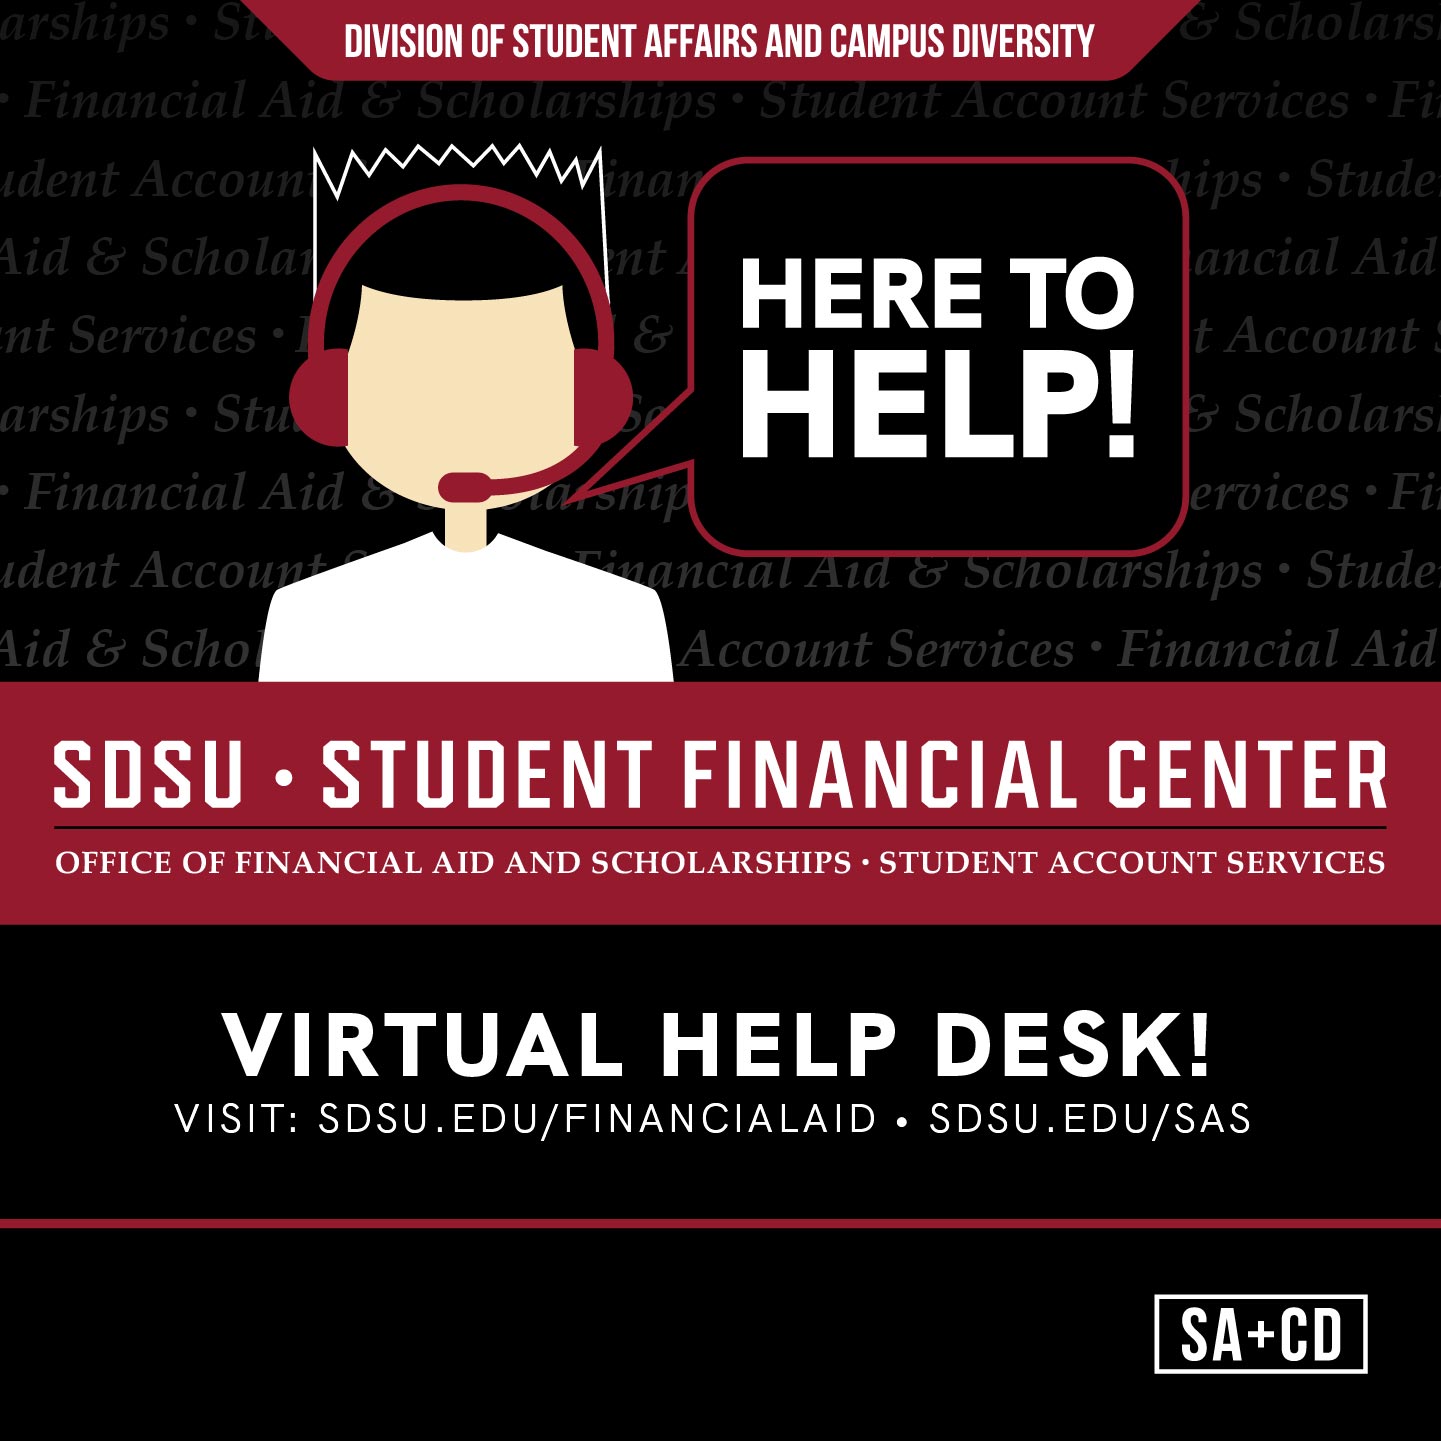 Access the Student Financial Center a zoom meeting to ask financial aid or student account questions